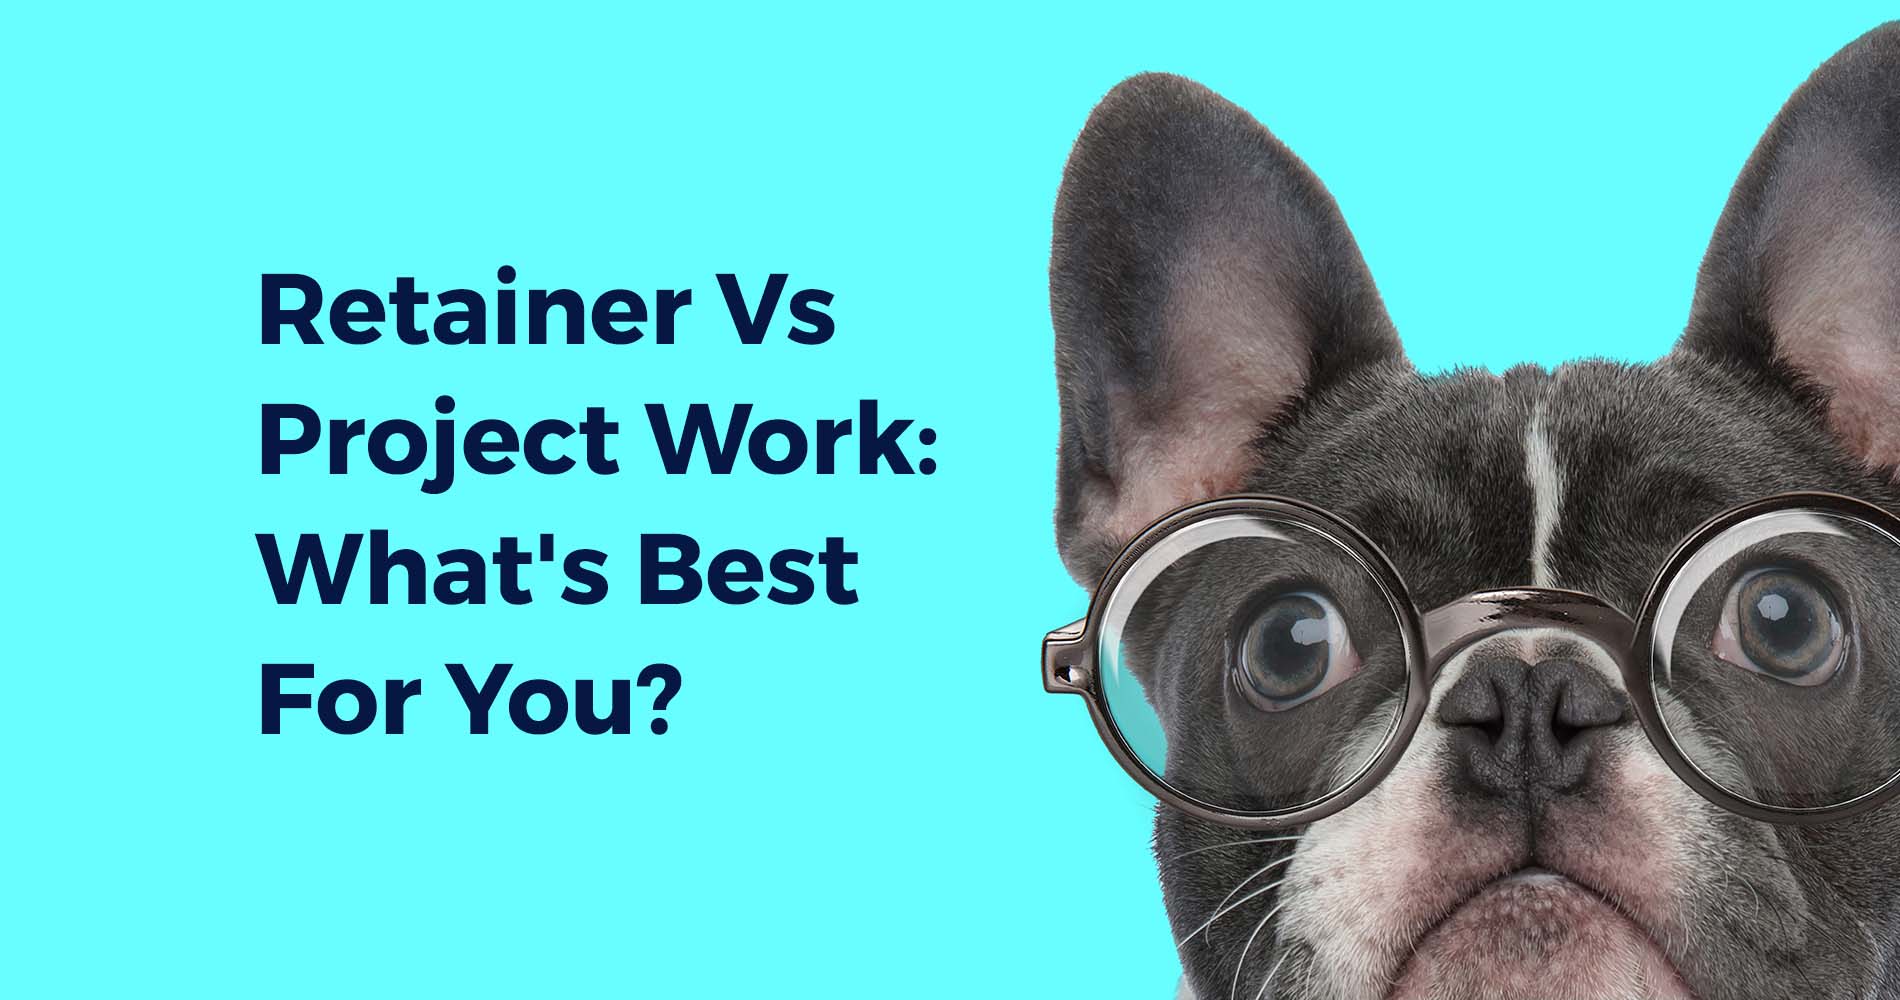 Retainer Vs Project Work: What's Best For You?